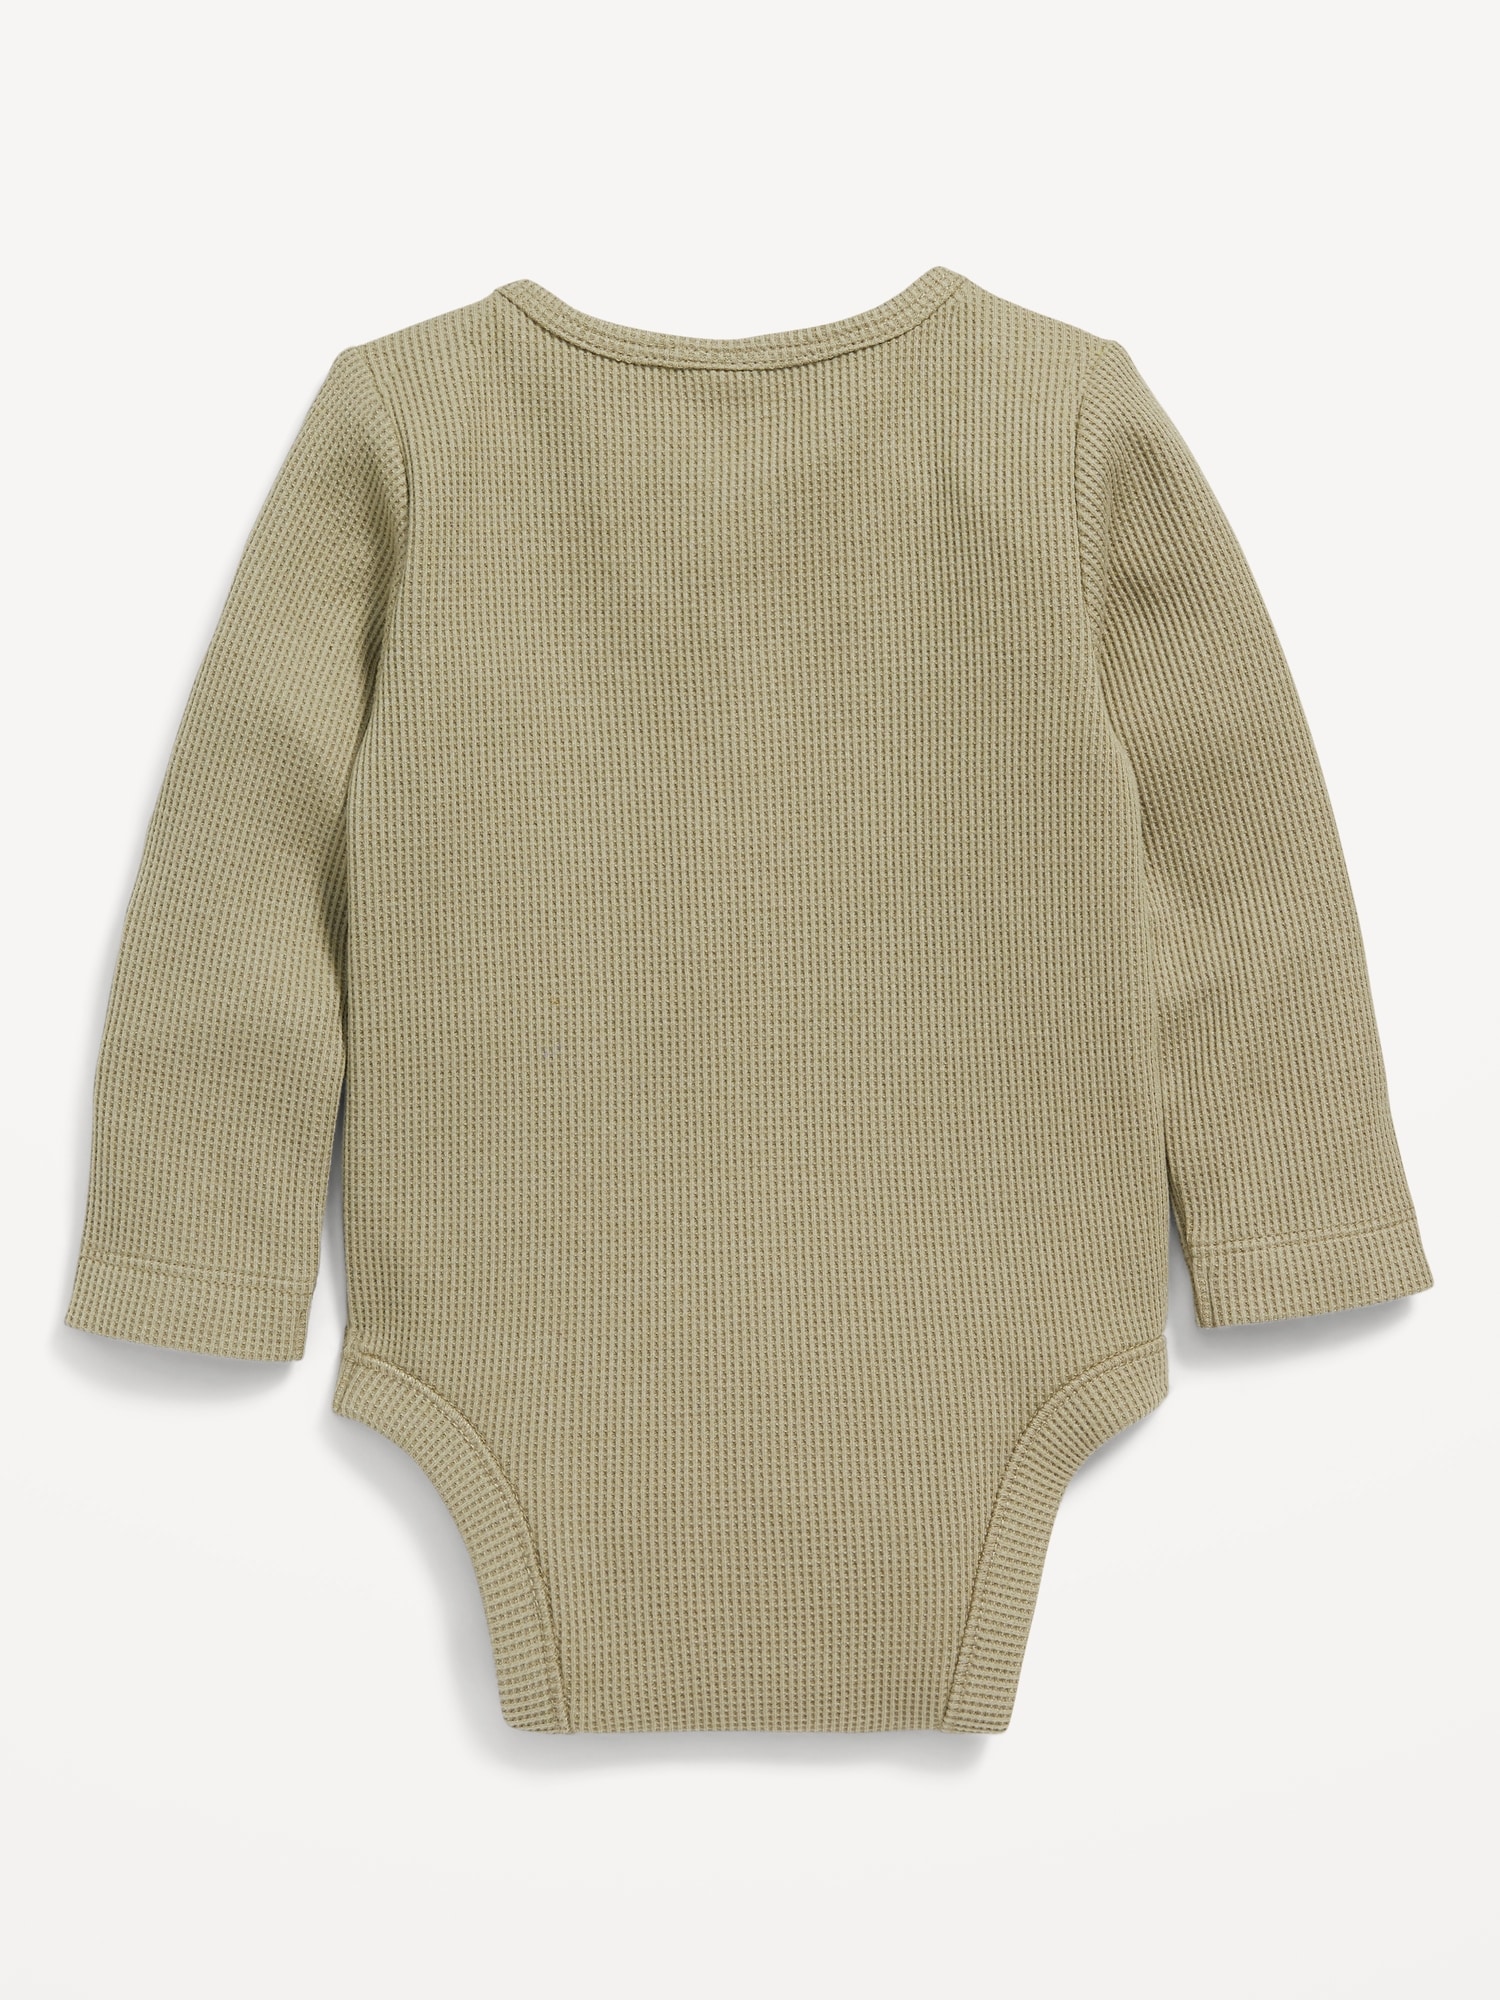 Unisex Long-Sleeve Thermal-Knit Henley Bodysuit for Baby | Old Navy